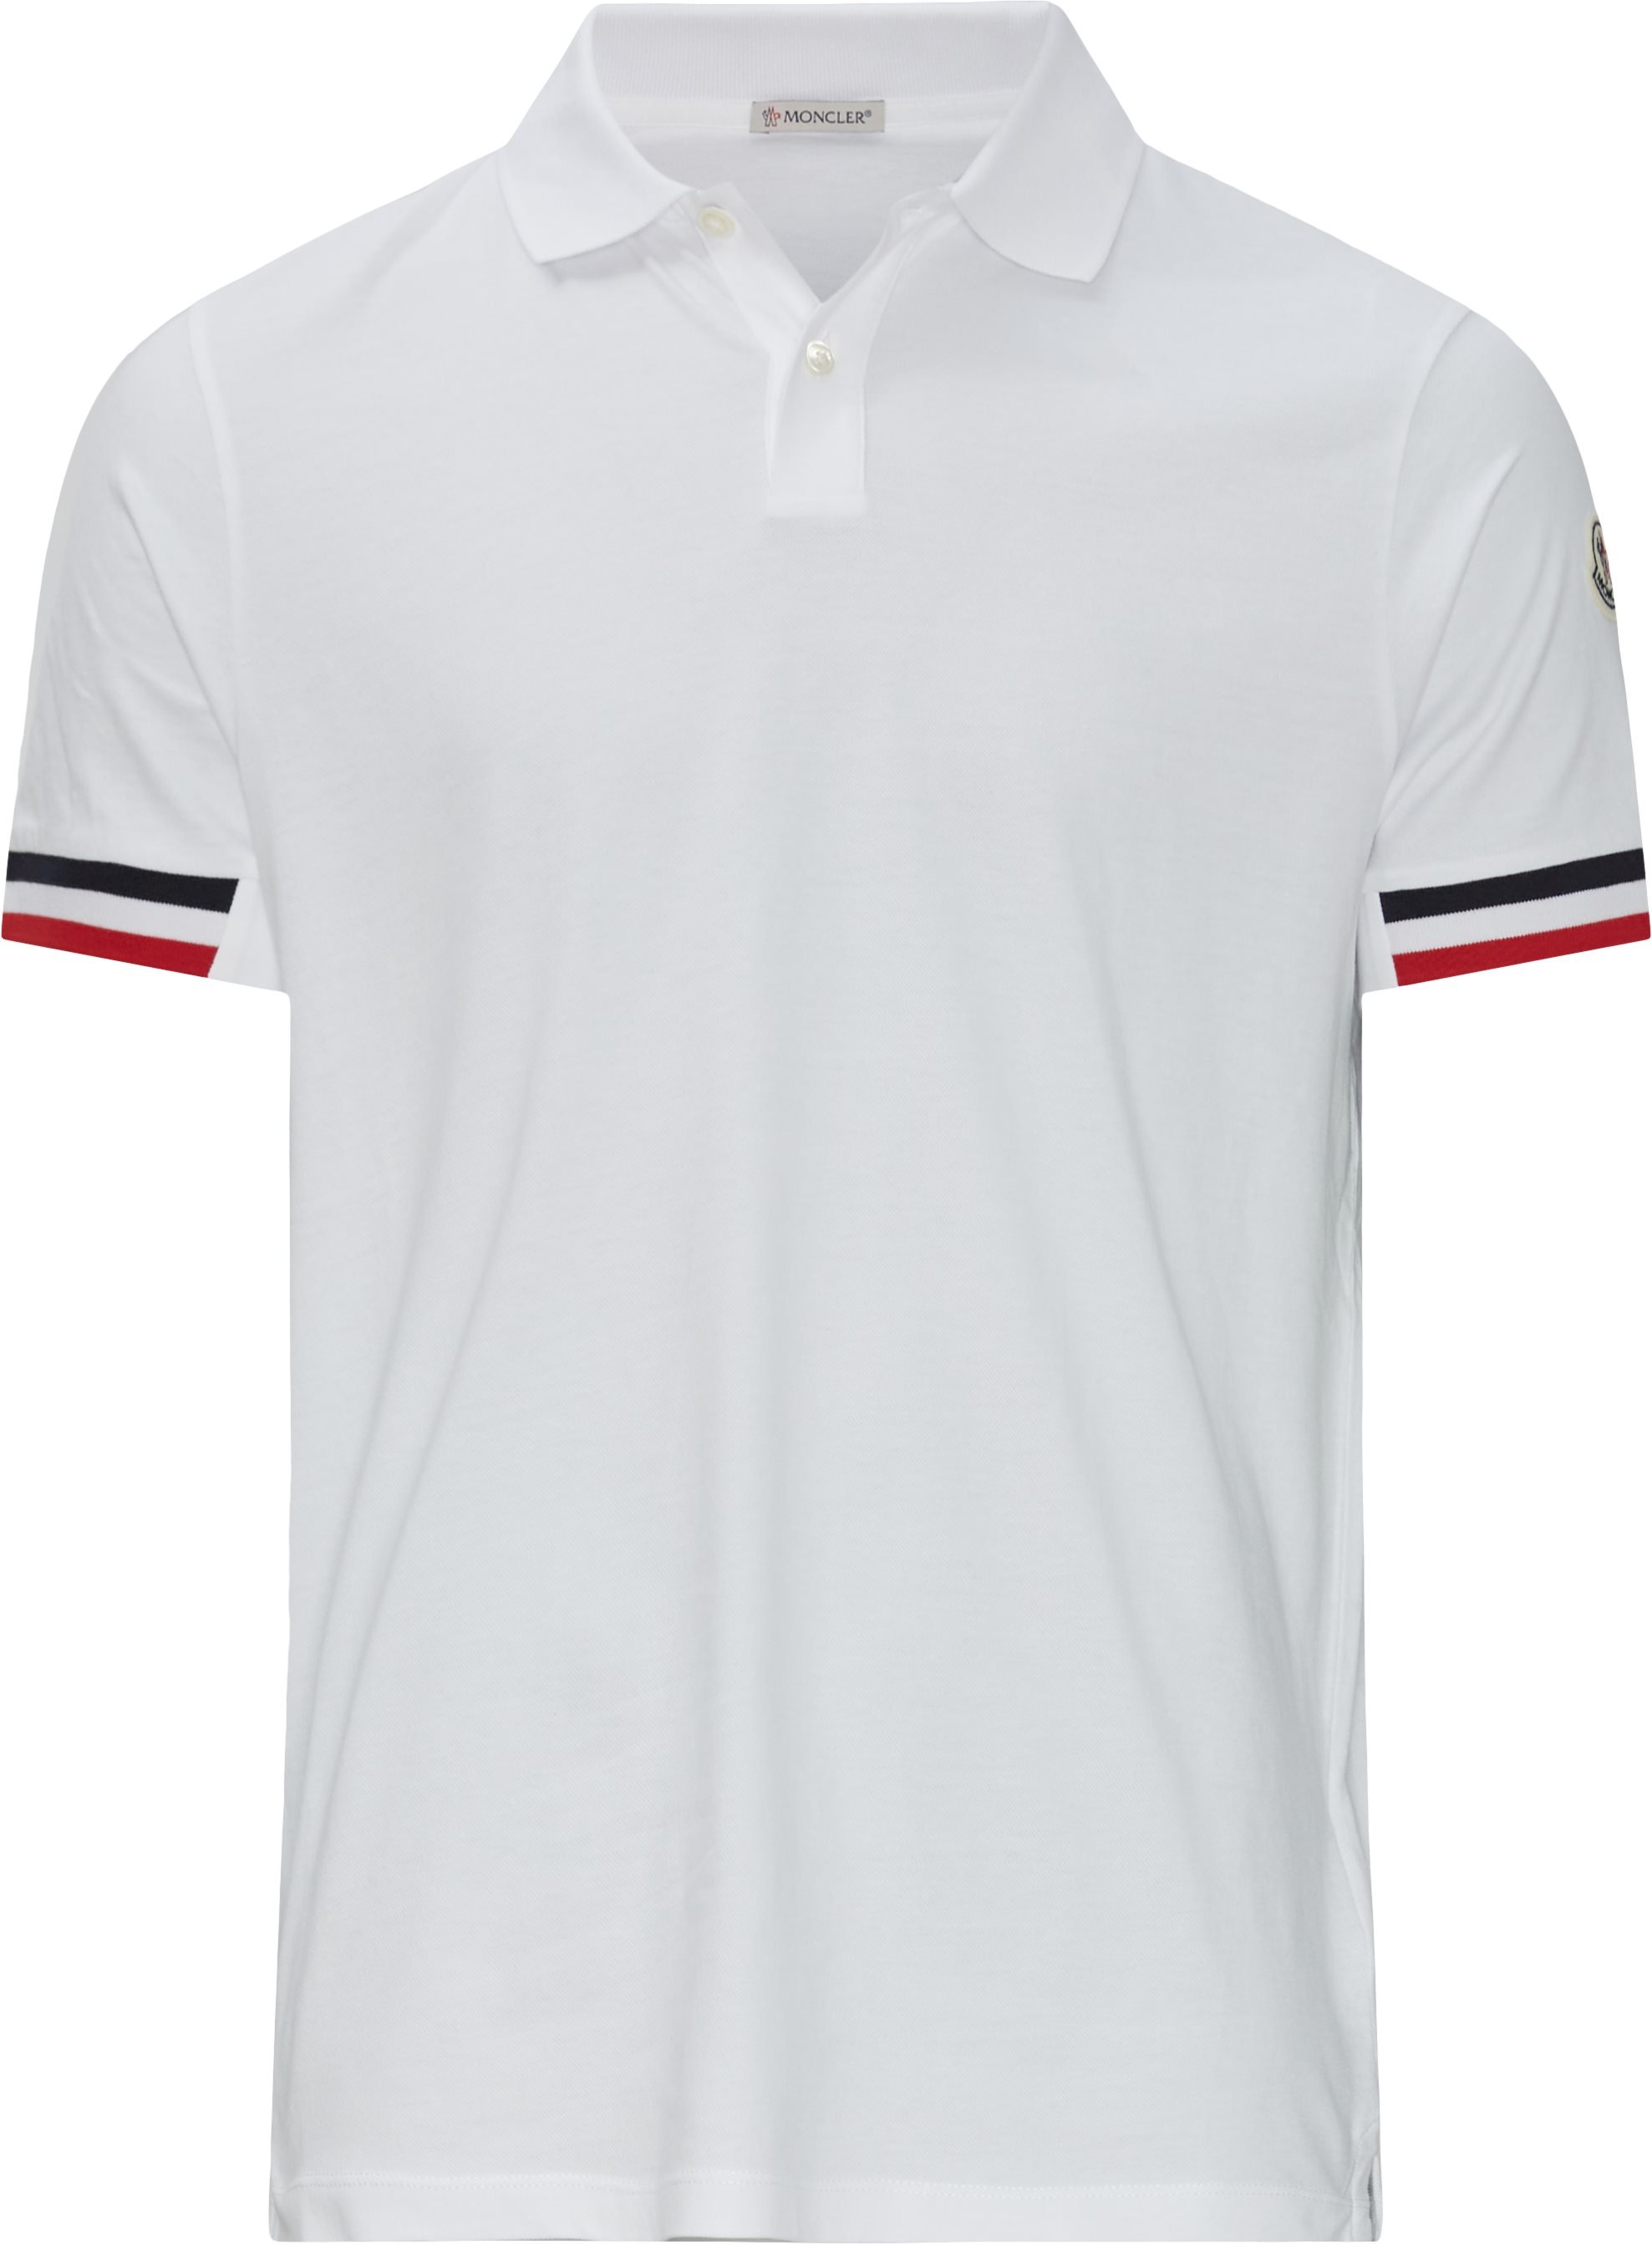 Tricolour Band Polo - T-shirts - Regular fit - Hvid